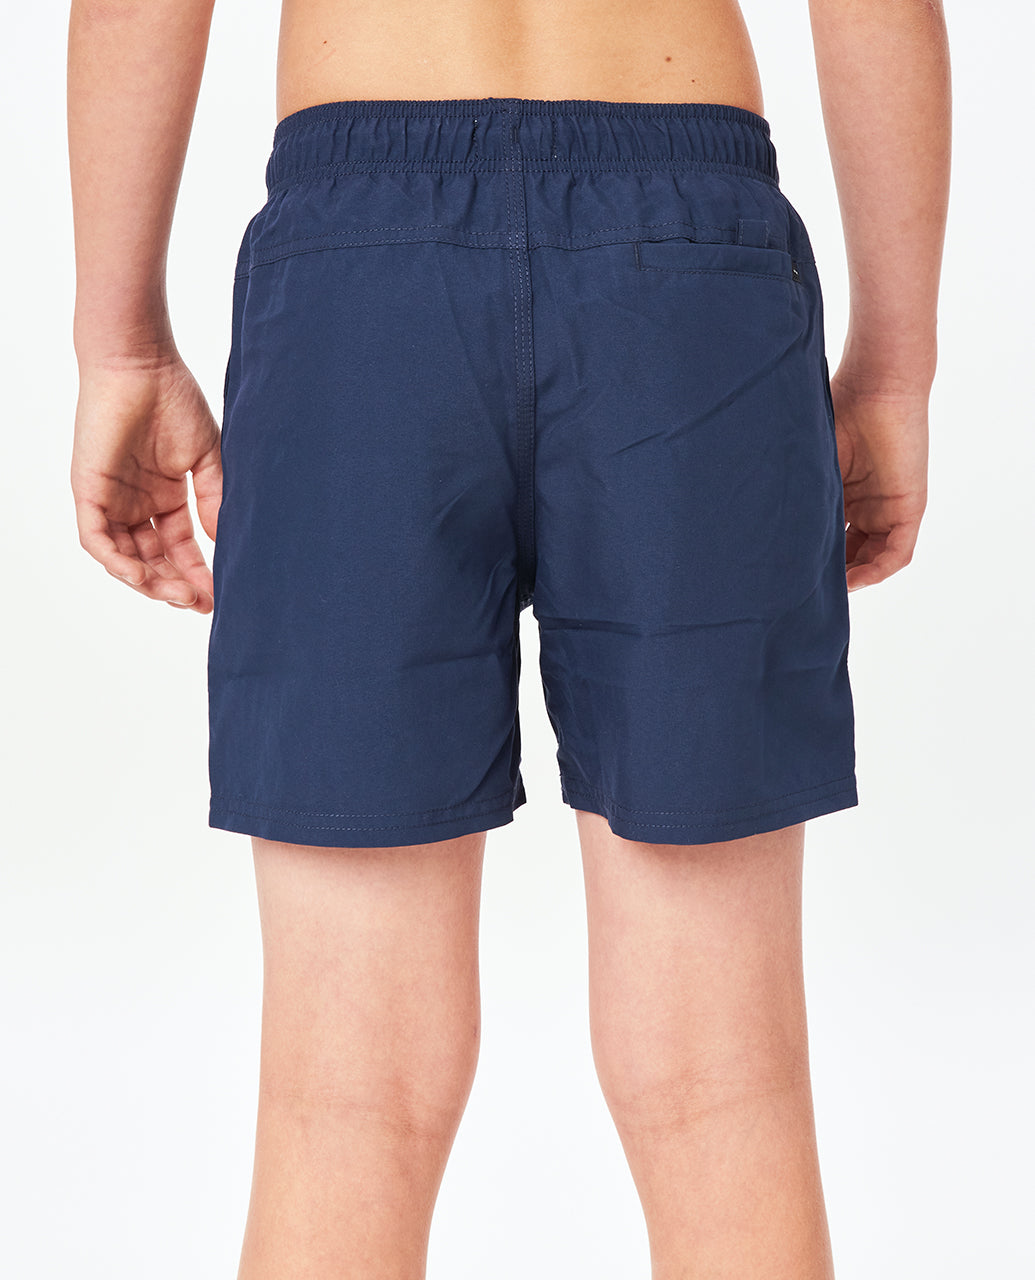 Rip Curl Offset Volley Kids Board Shorts